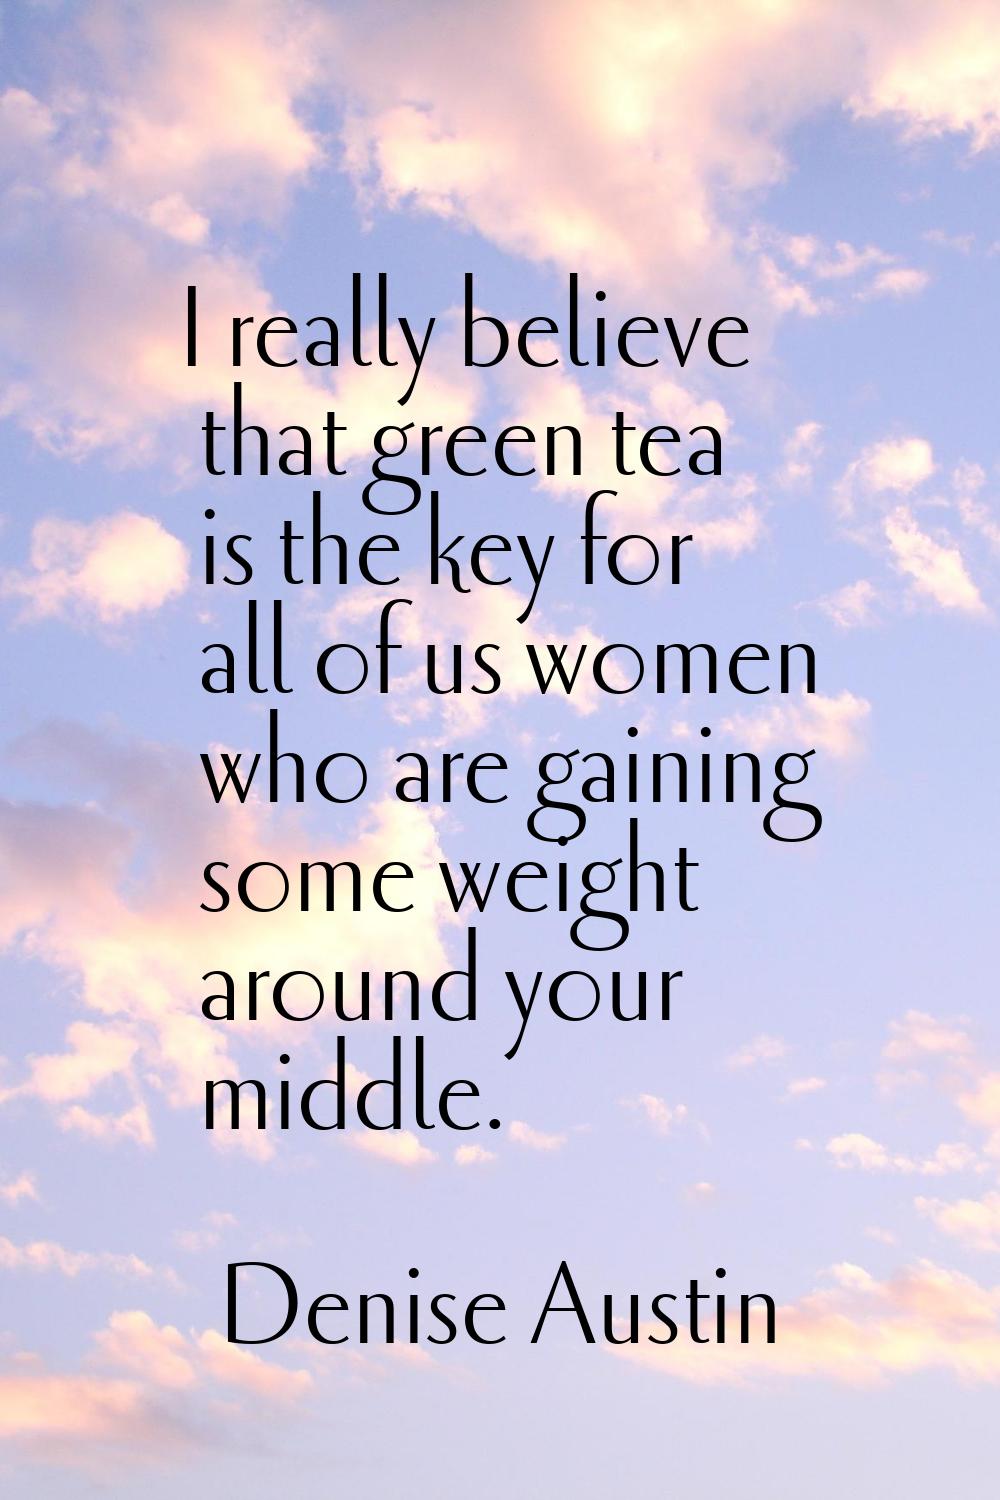 I really believe that green tea is the key for all of us women who are gaining some weight around y